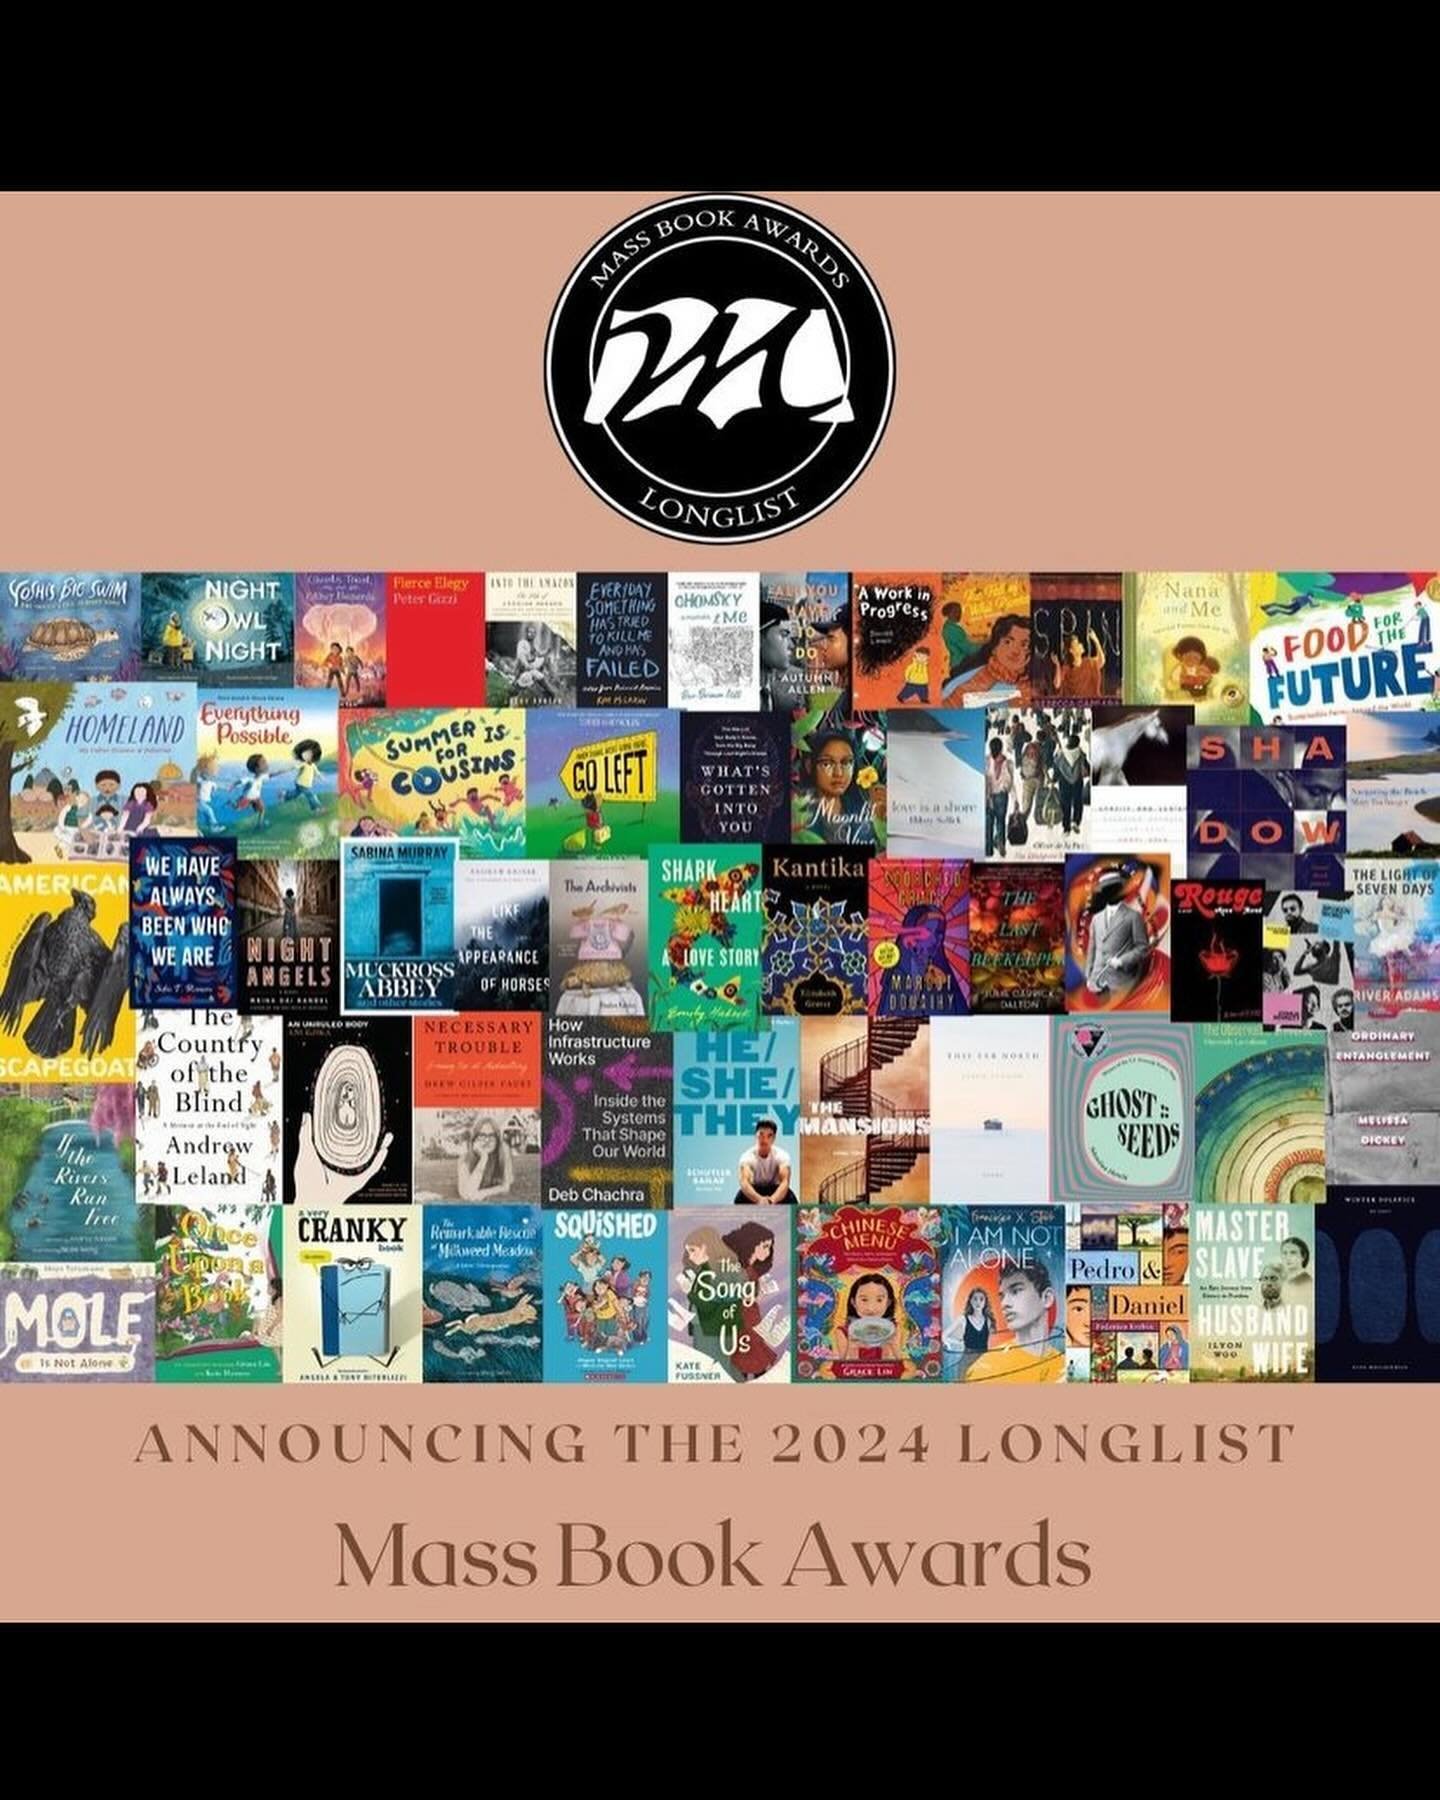 ICYMI: Yesterday, @masscenterforbook released their longlist for the 2024 Massachusetts Book Awards, which recognizes significant works of fiction, nonfiction, poetry, translated literature, and children&rsquo;s/young adult literature written, illust